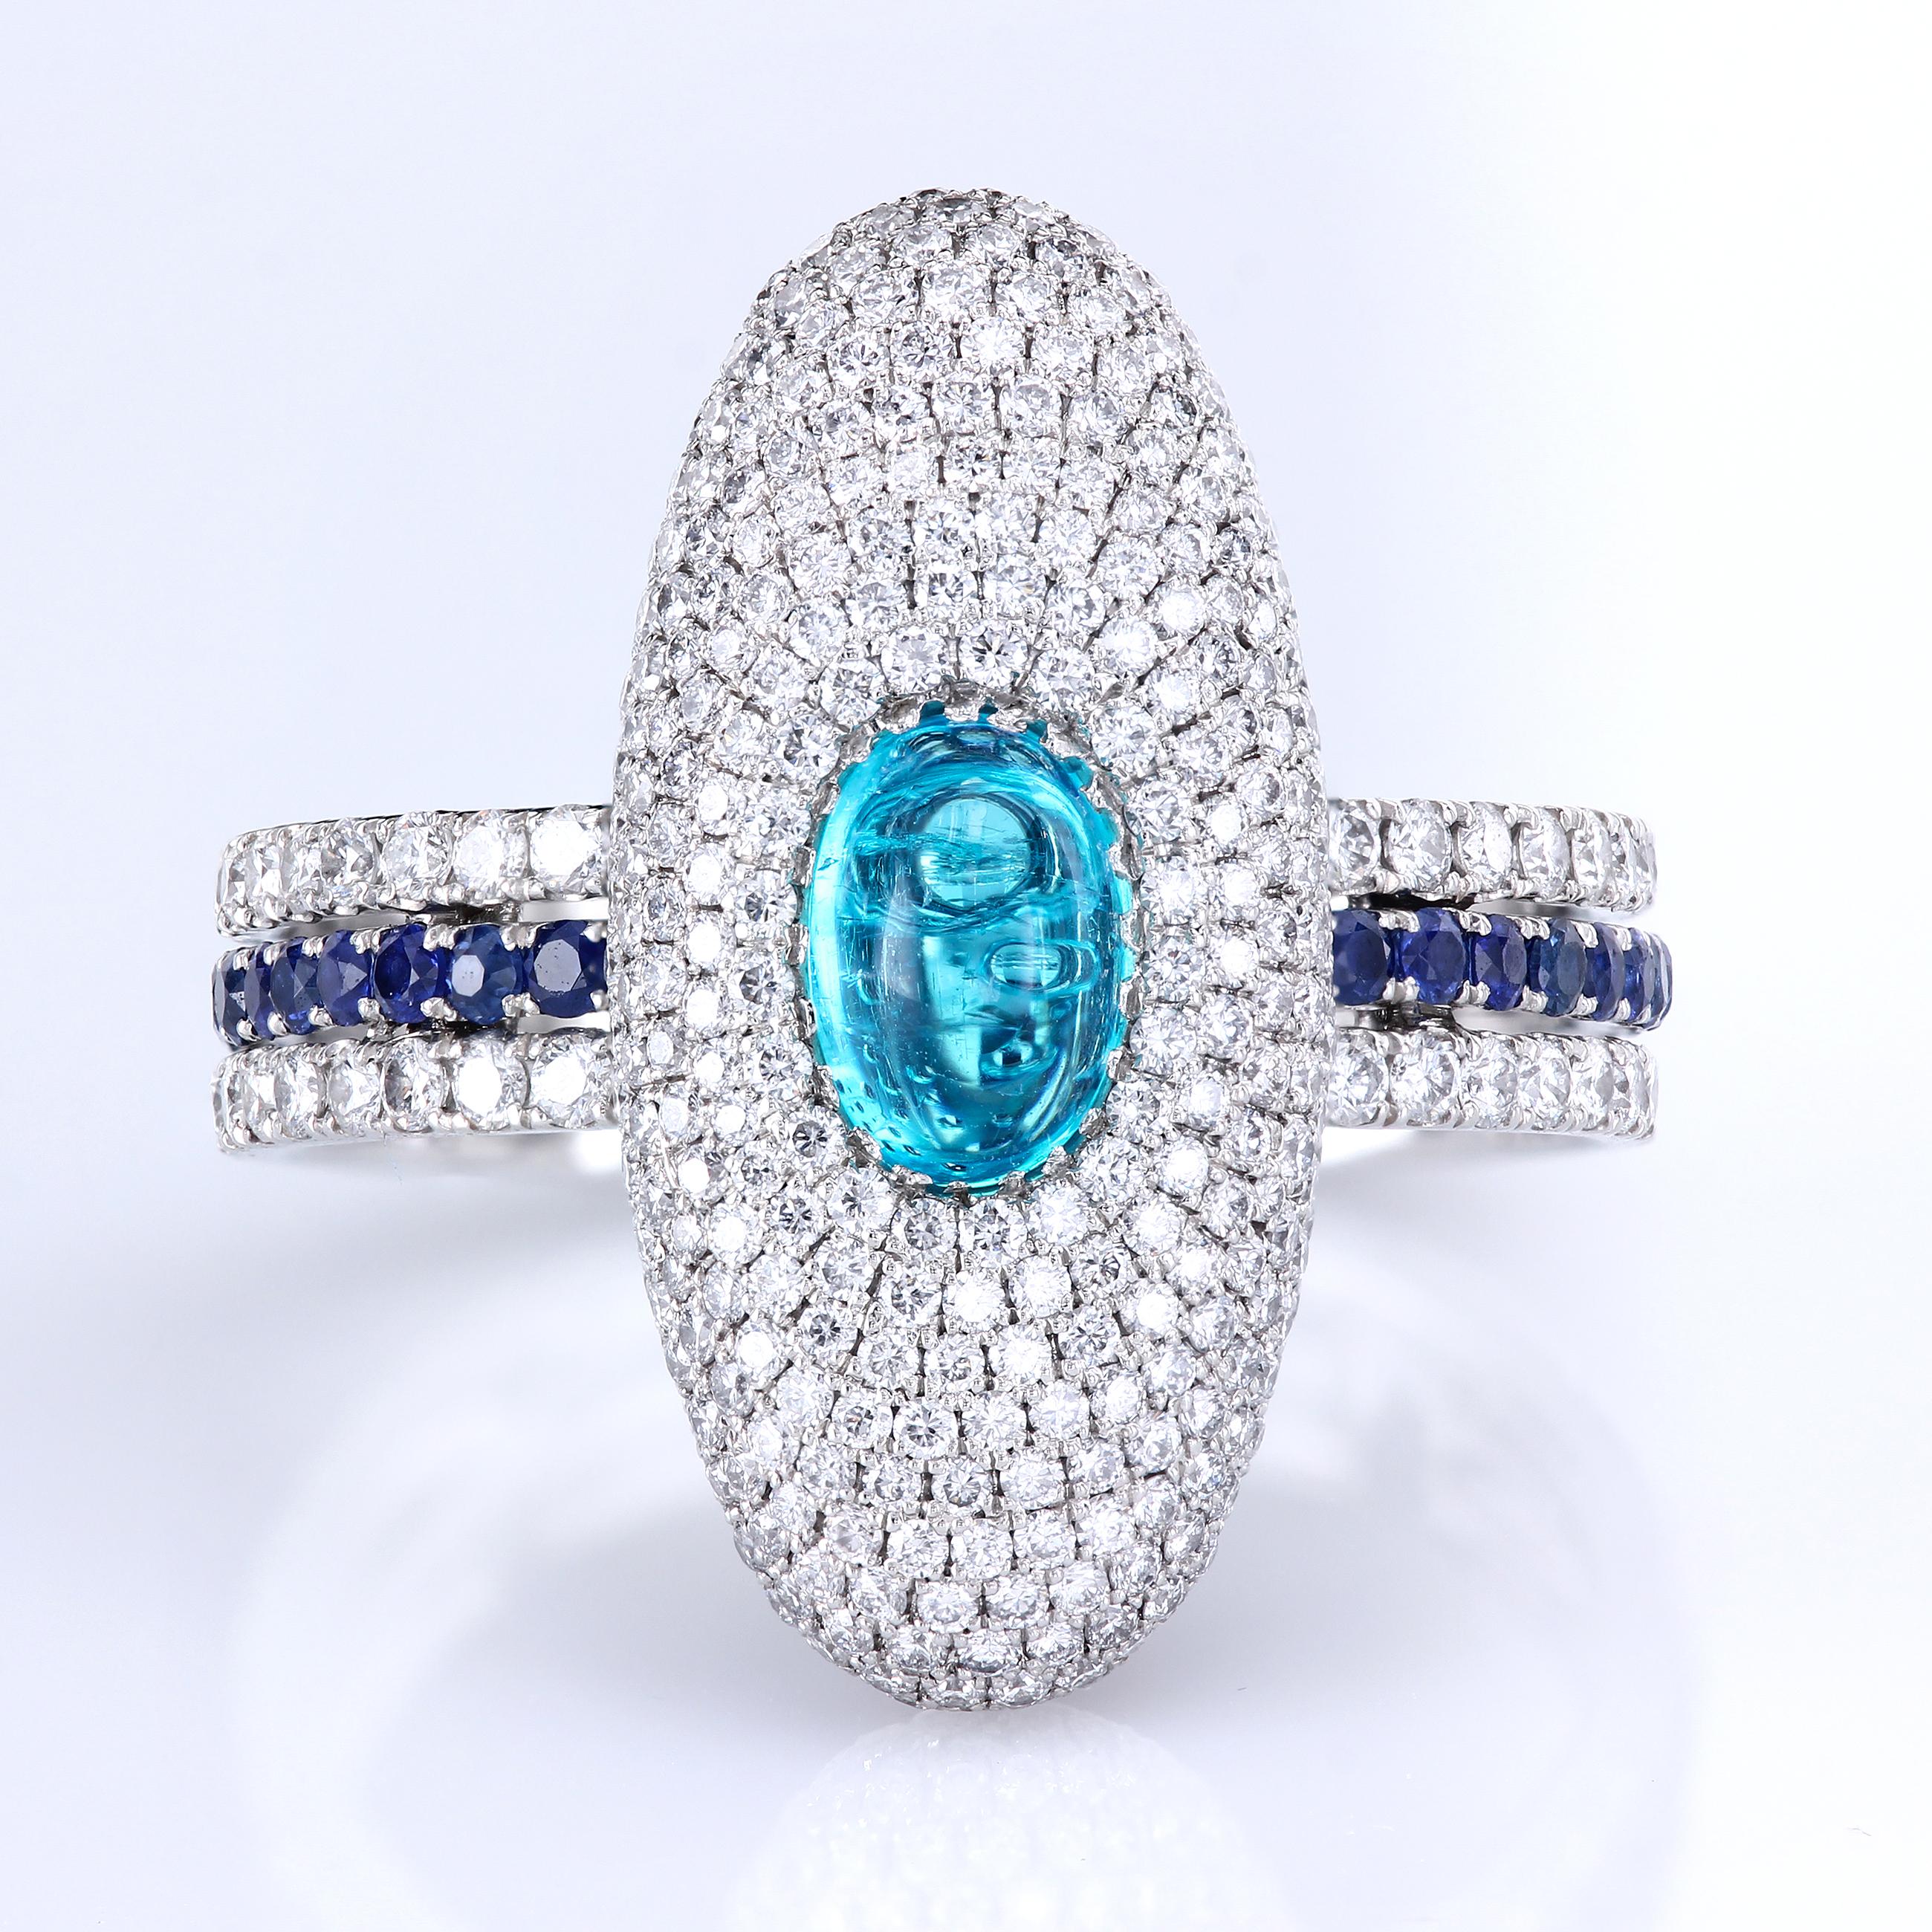 Artist Genuine Brazilian Paraiba Tourmaline in a Micro Pave Statement Ring by Leon Mege For Sale